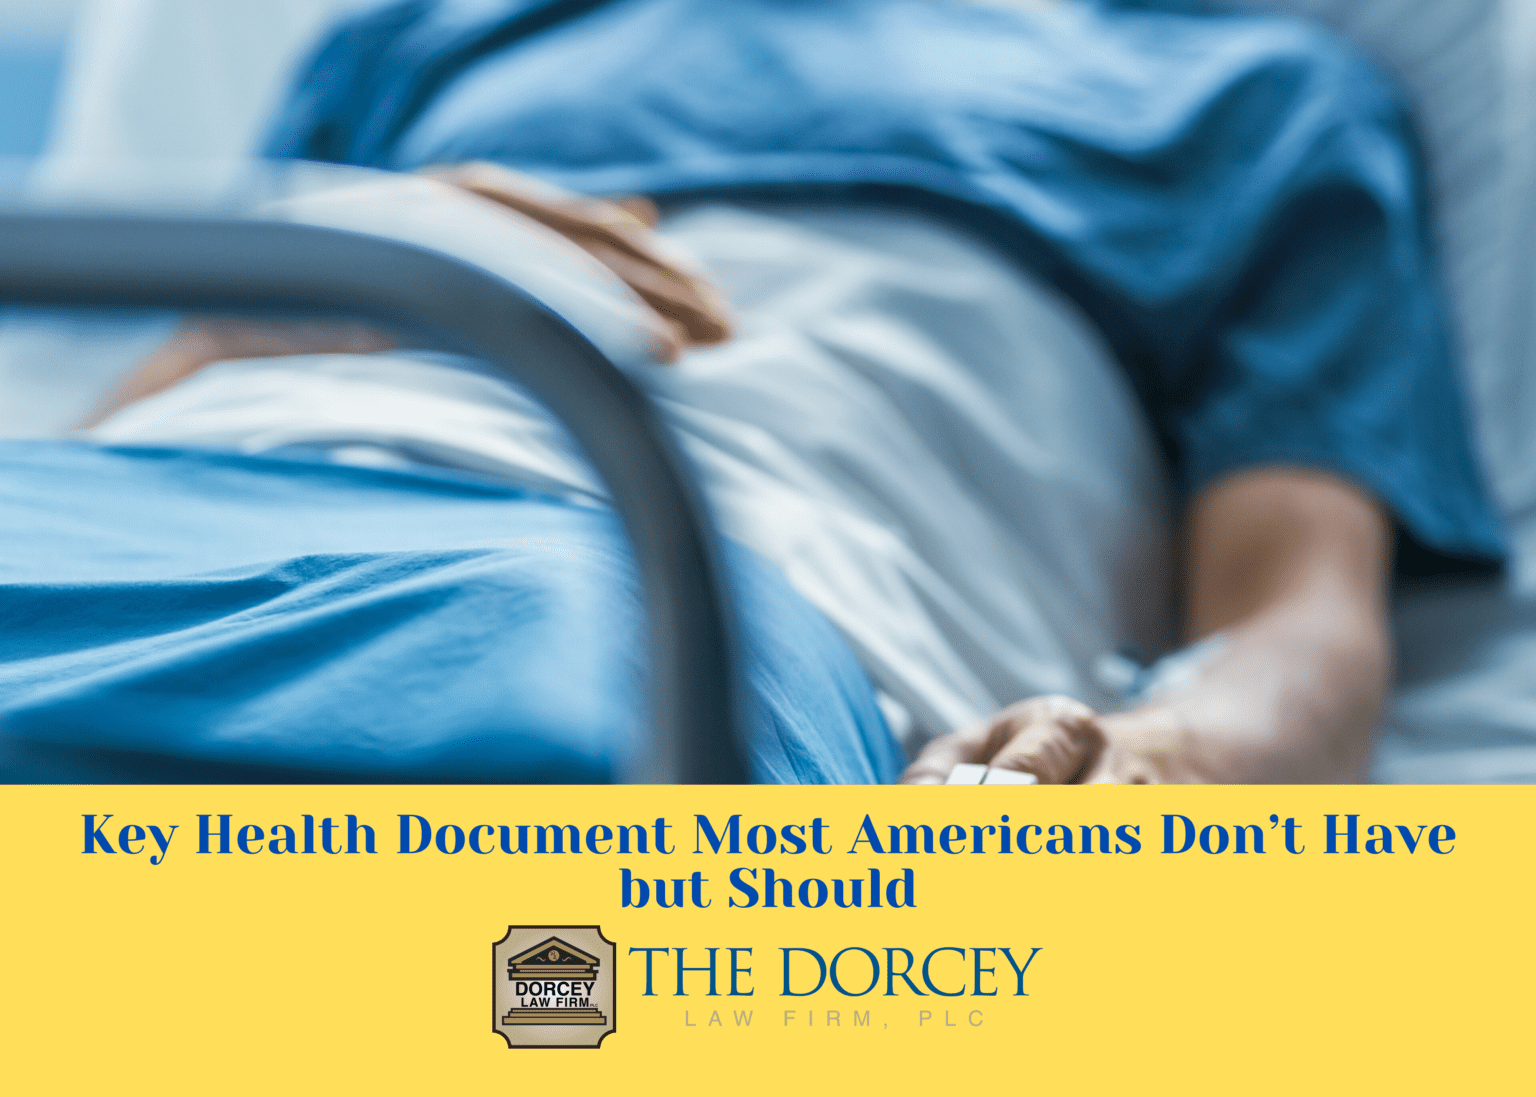 Key Health Document Most Americans Don’t Have but Should